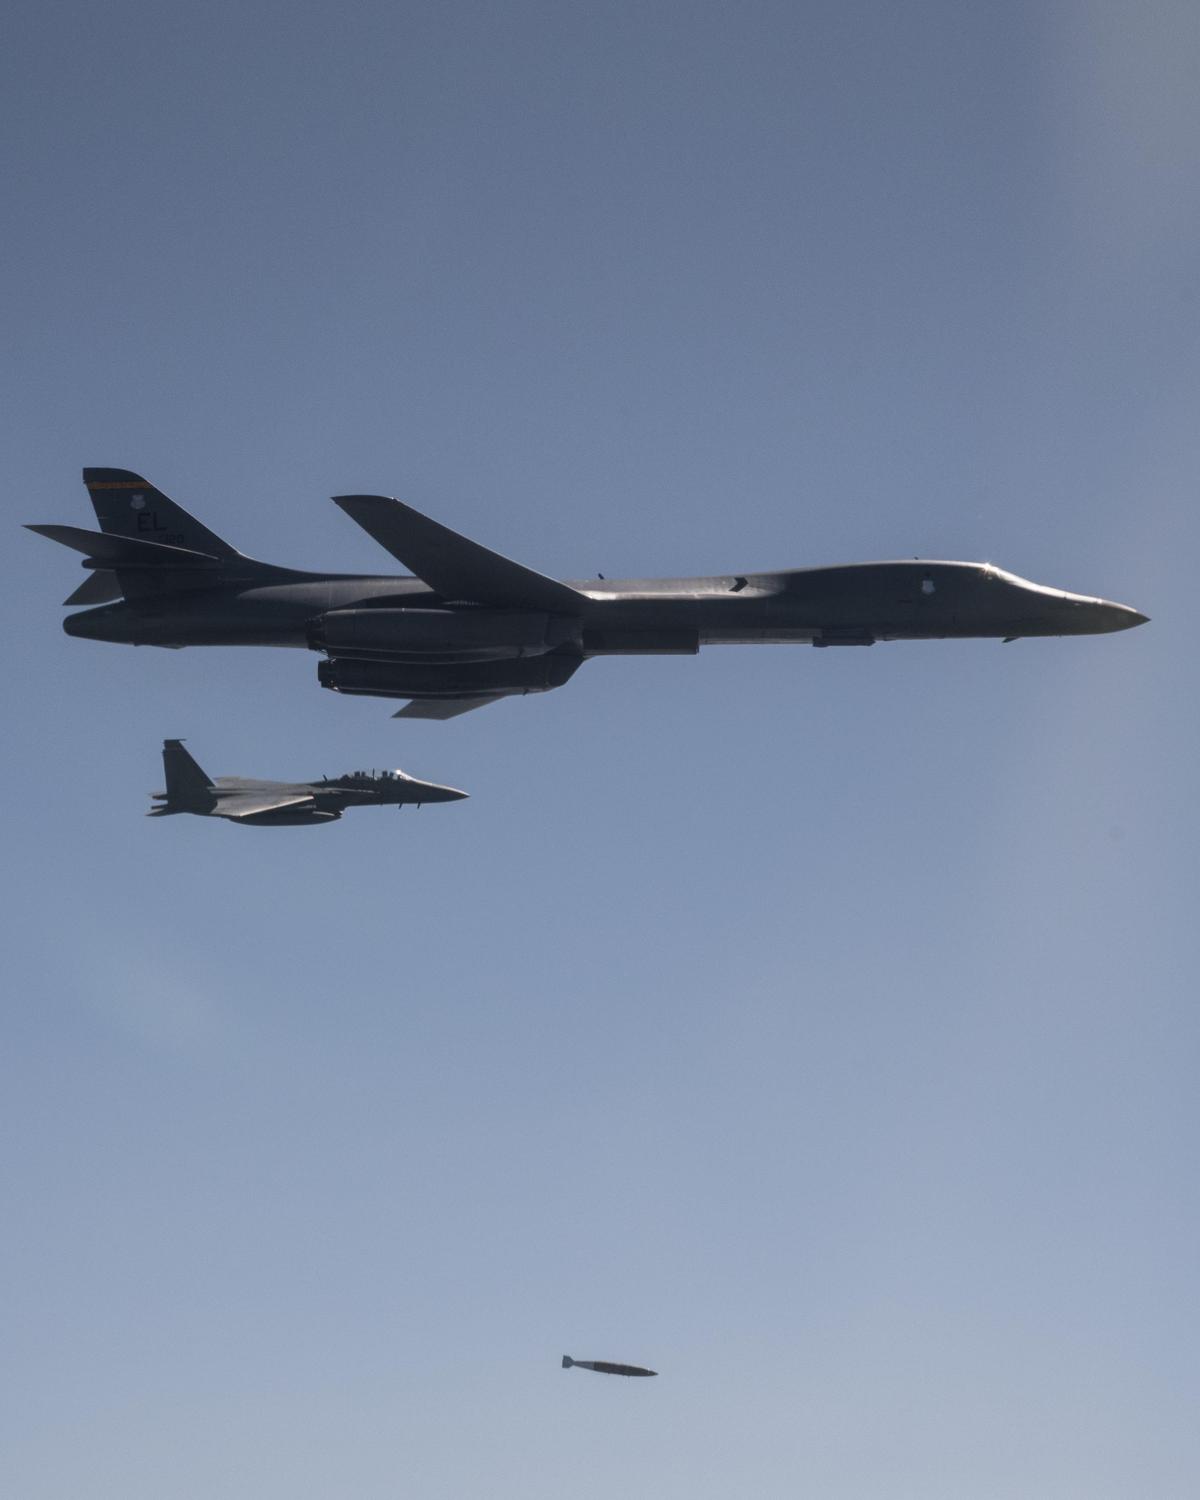 A U.S. Air Force B-1B Lancer bomber, flanked by South Korean F-15K Slam Eagle fighters, drops a 2,000-pound live munition at Pilsung Training Range, South Korea, as a part of a show of force mission in response to North Korean unsanctioned intercontinental ballistic missile tests, Sept. 17, 2017. (Air Force photo by Capt. Mike Karnes)